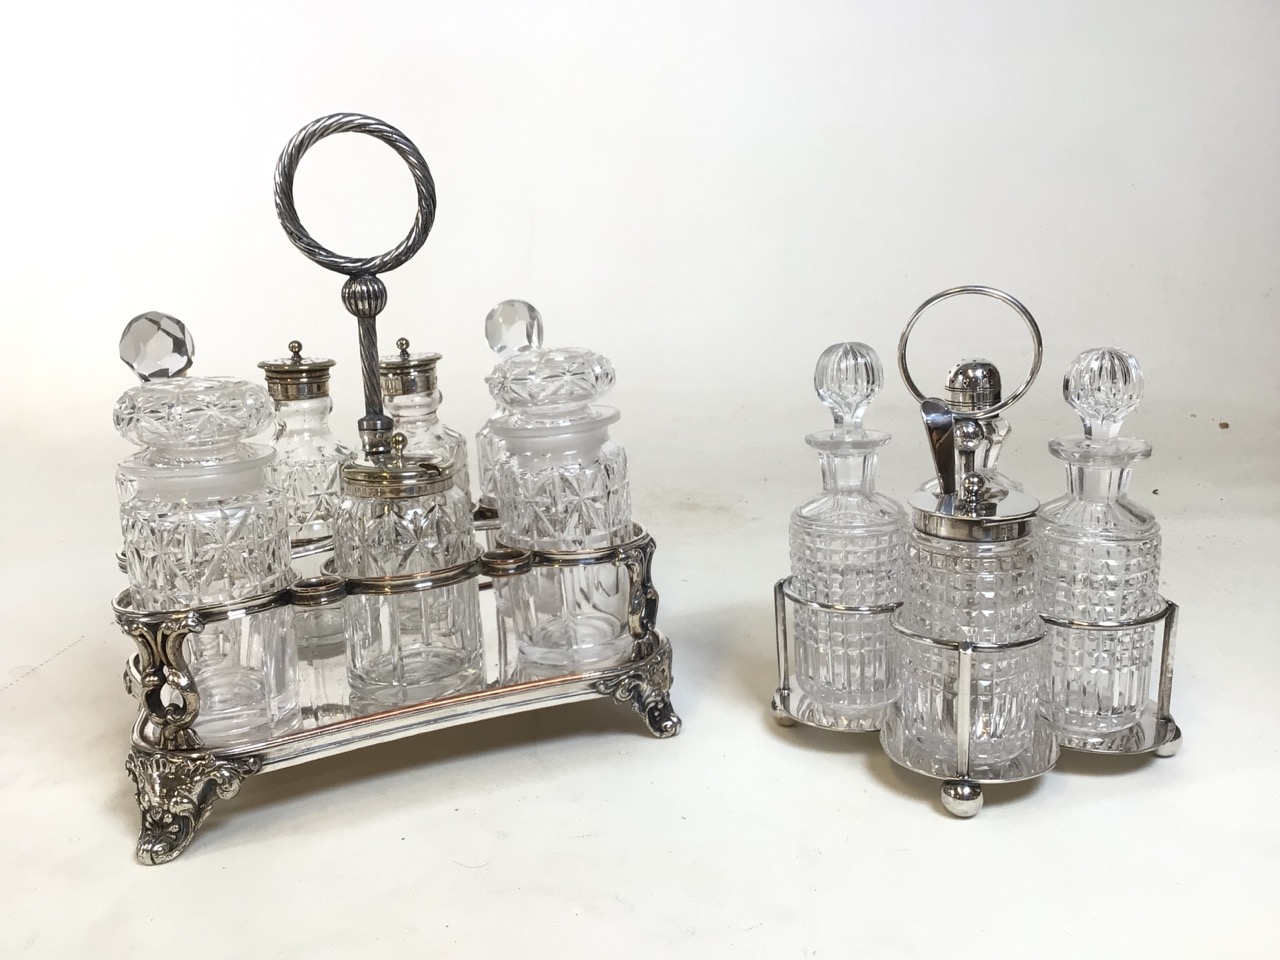 Two silver plate and cut glass cruet sets. A 7 and 4 piece condiment caddy respectively. Good